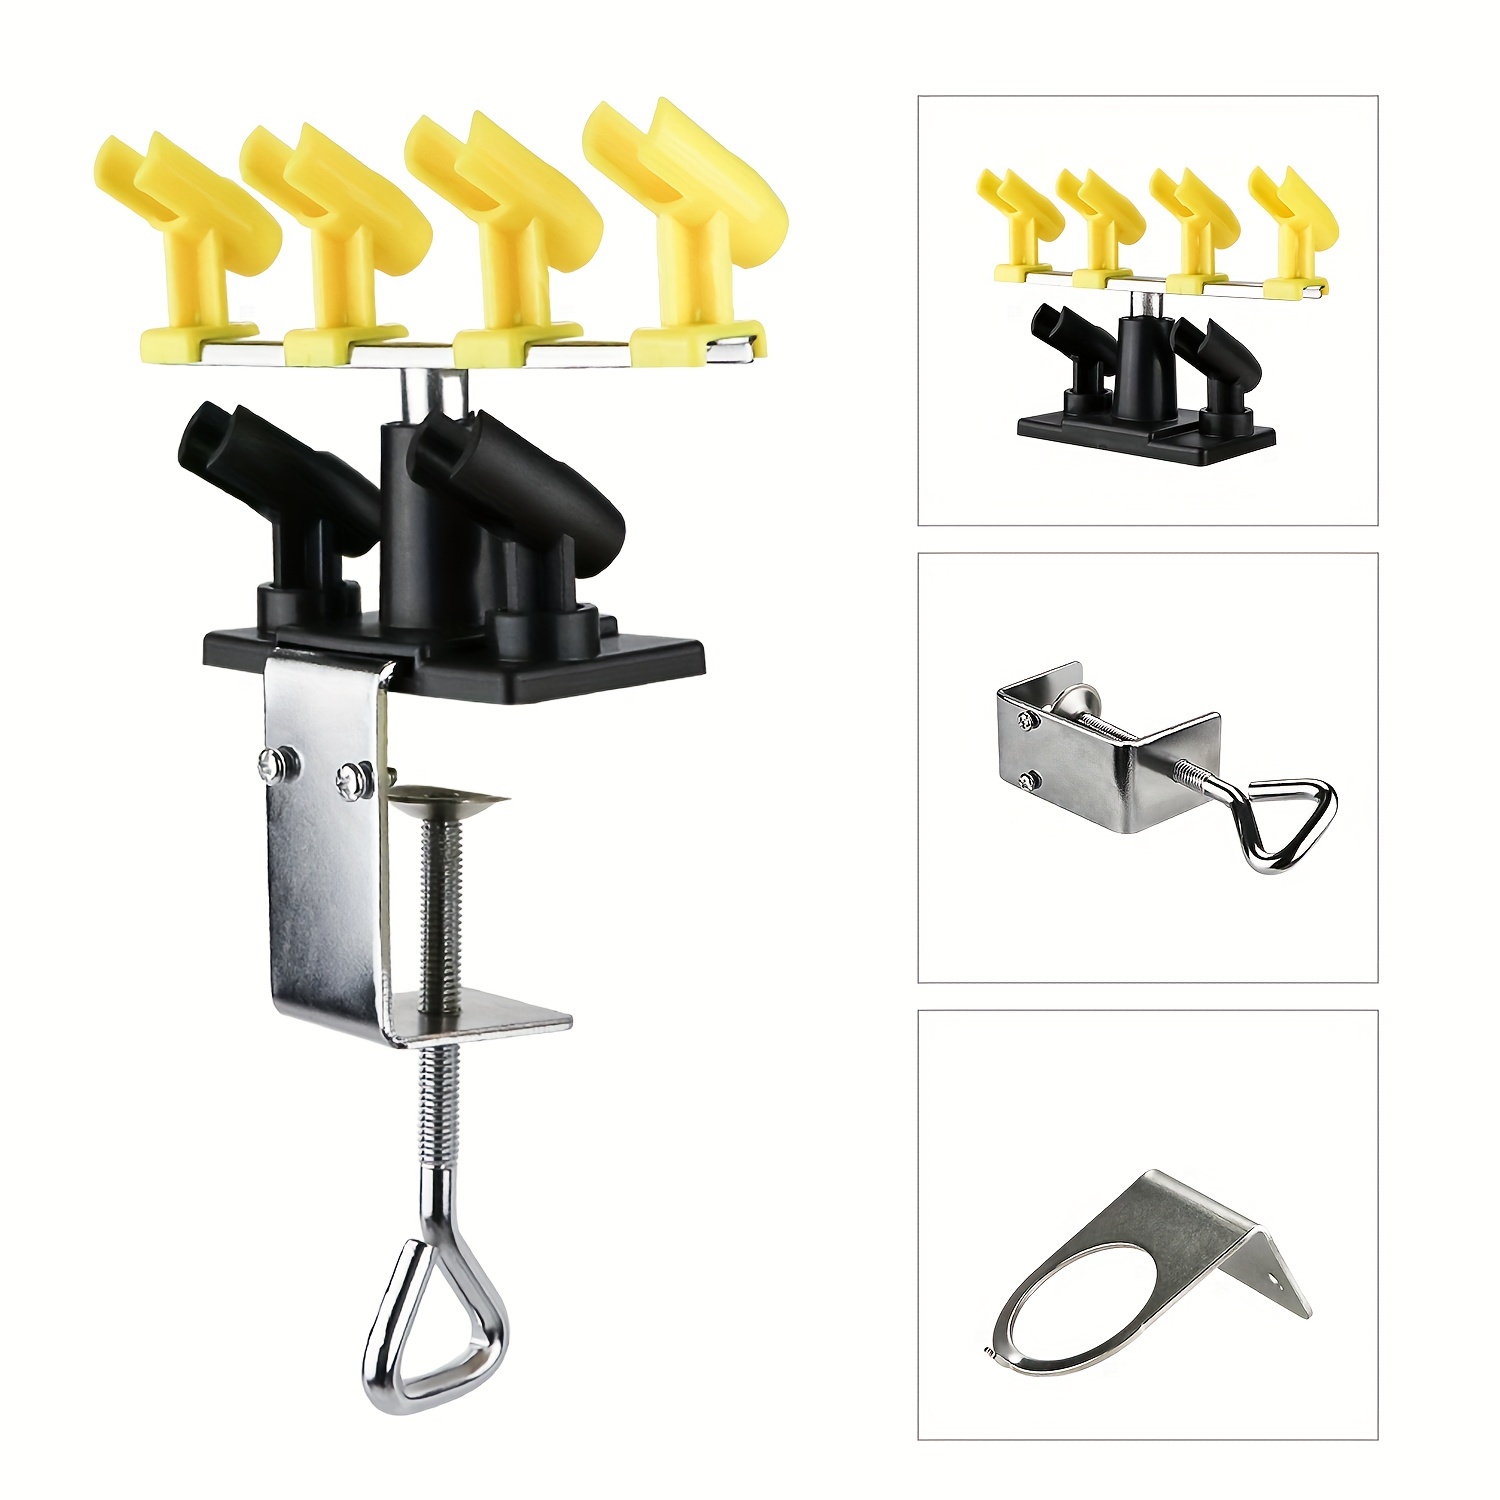 Airbrush Stand Practical Clamp-on Style Airbrush Holder Two-brush Table Stand  Airbrush Rack Tool Easy to Use - AliExpress